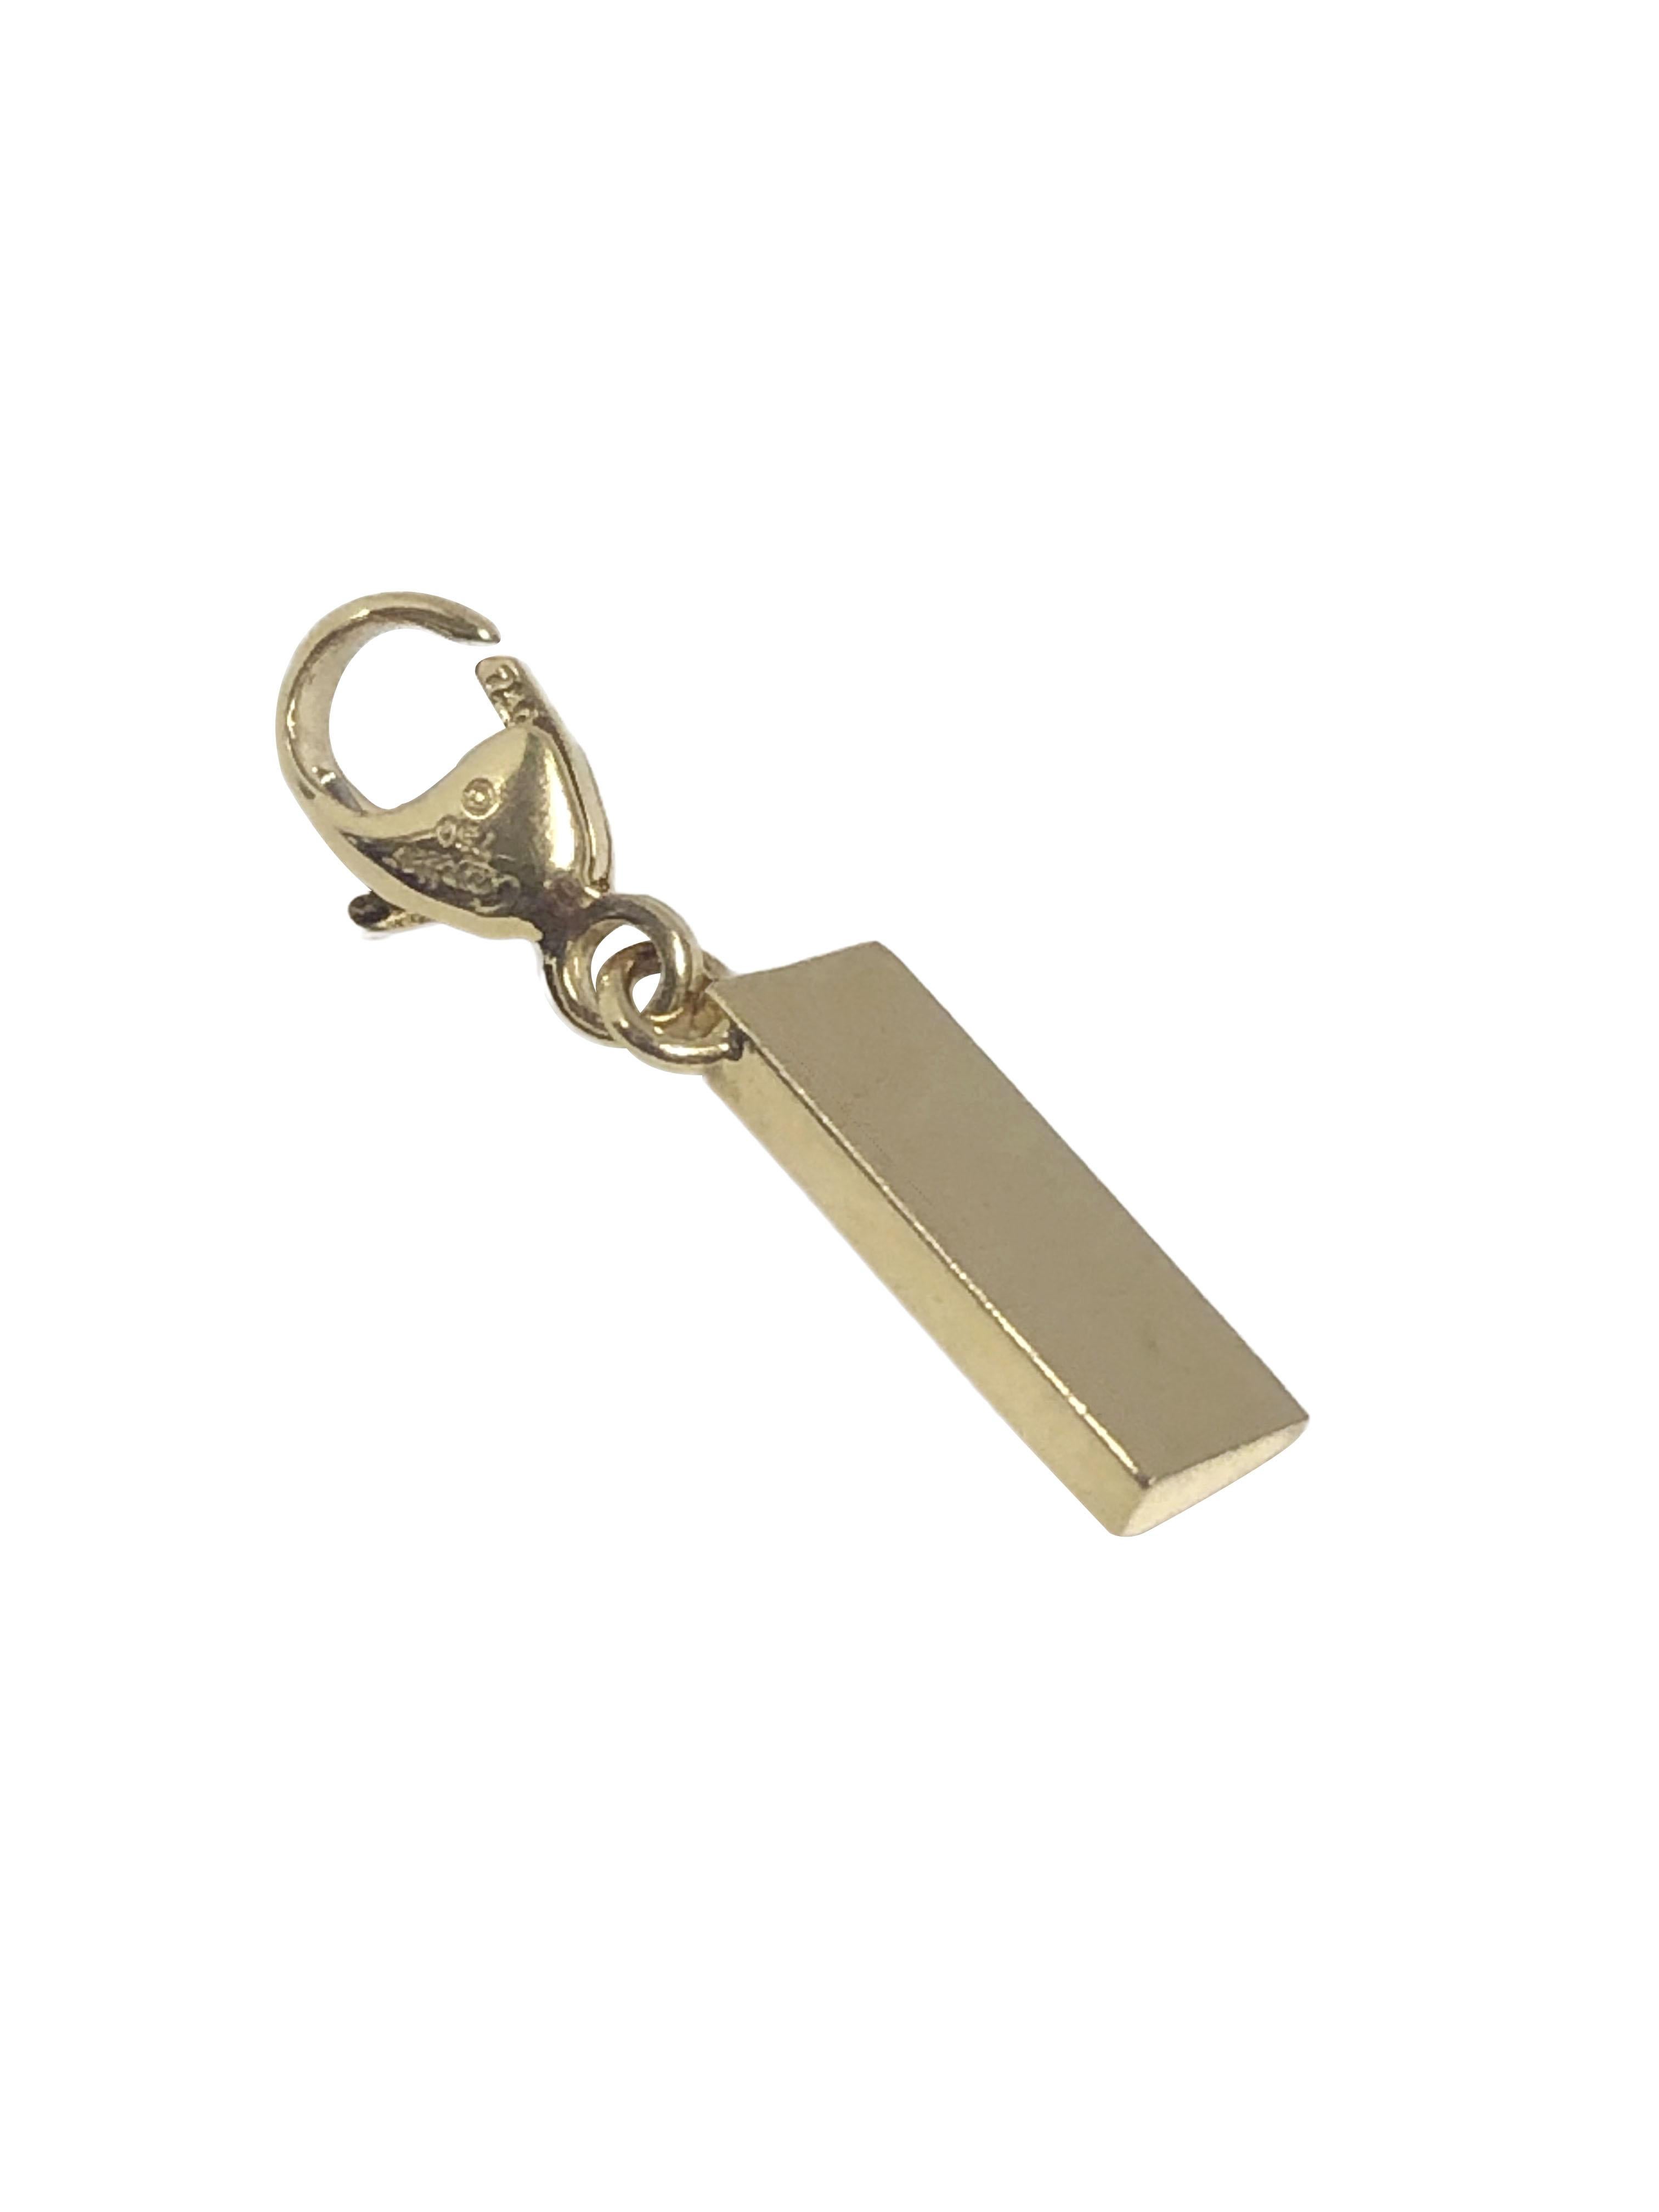 Circa 2000 Cartier 18k Yellow Gold Ruler Charm, measuring 3/4 inch in length including the lobster claw style lock. Signed and numbered. 